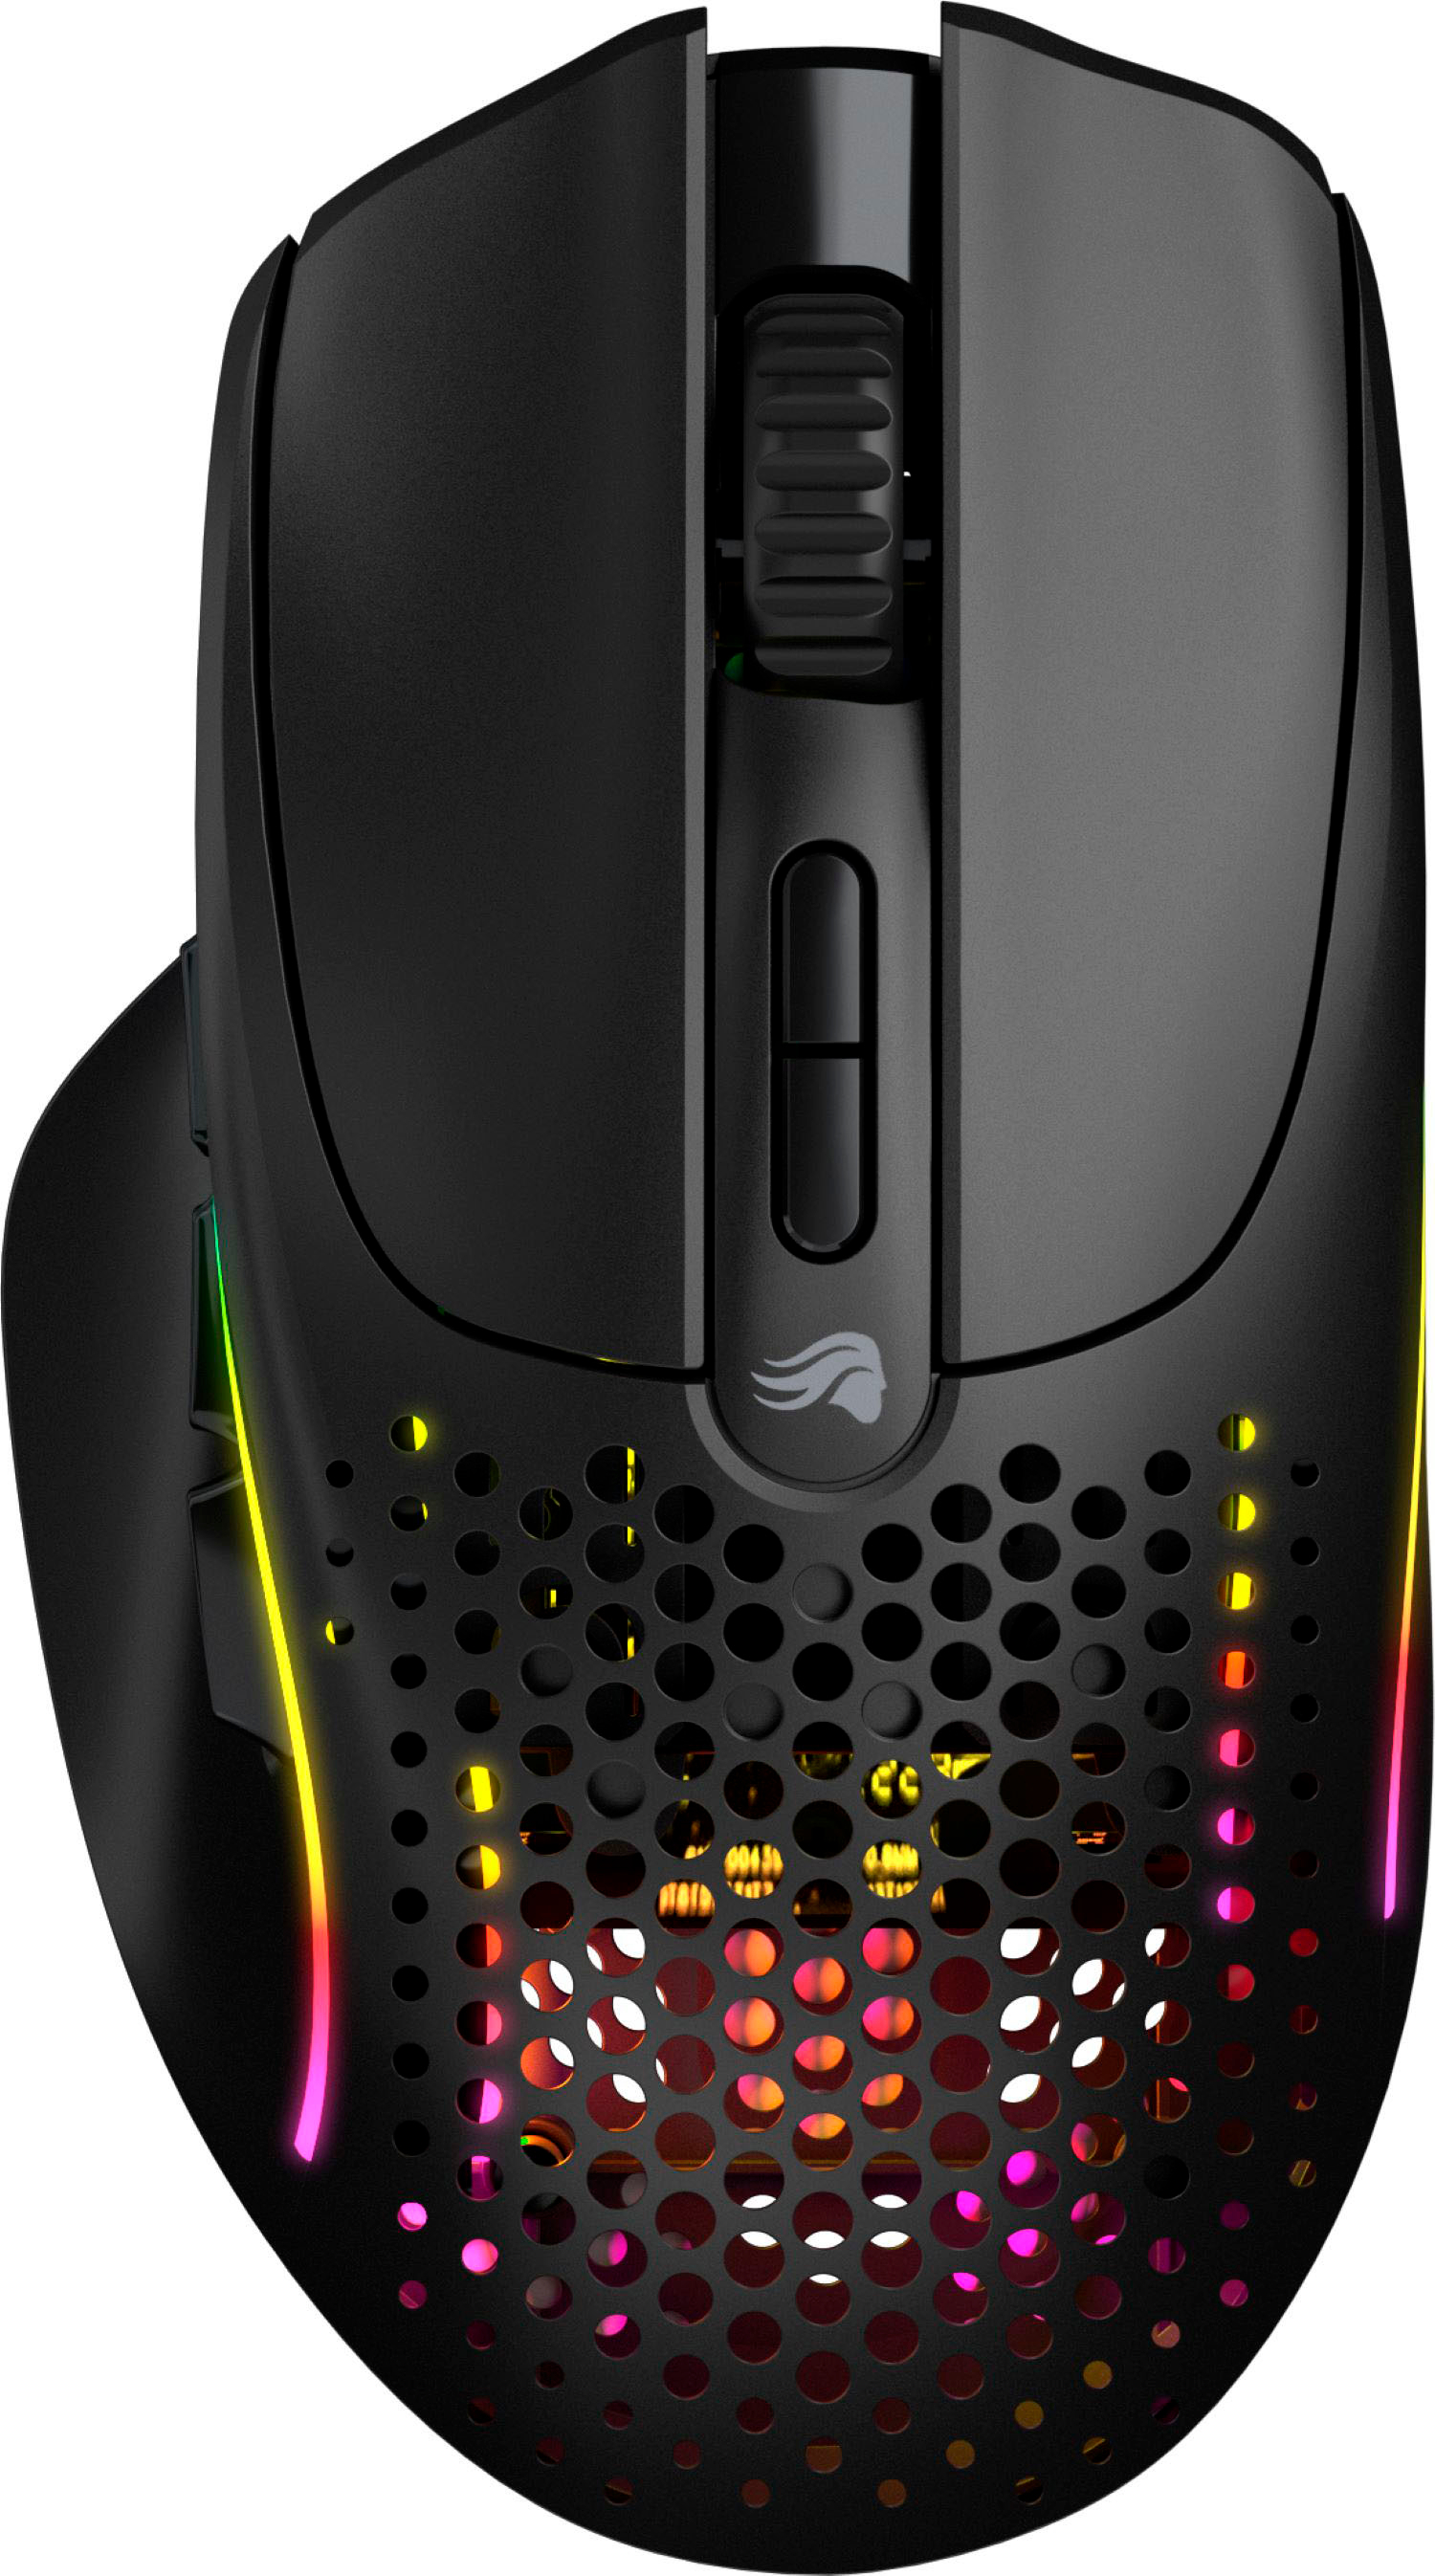 Glorious Model I 2 Ultra Lightweight Wireless Optical Gaming Mouse